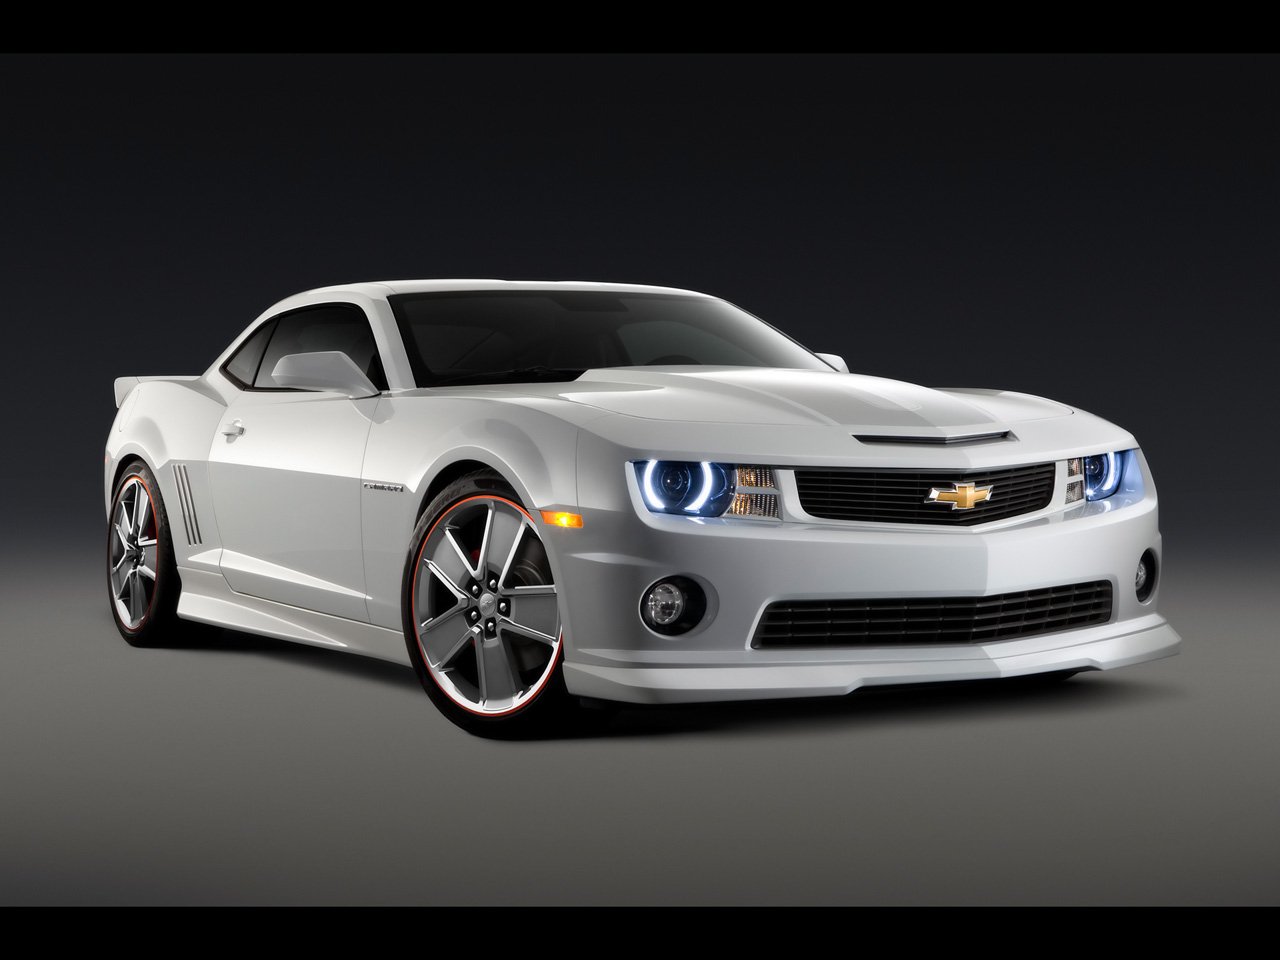 Chevy Muscle Car Wallpaper 6022 Hd Wallpapers in Cars   Imagescicom 1280x960